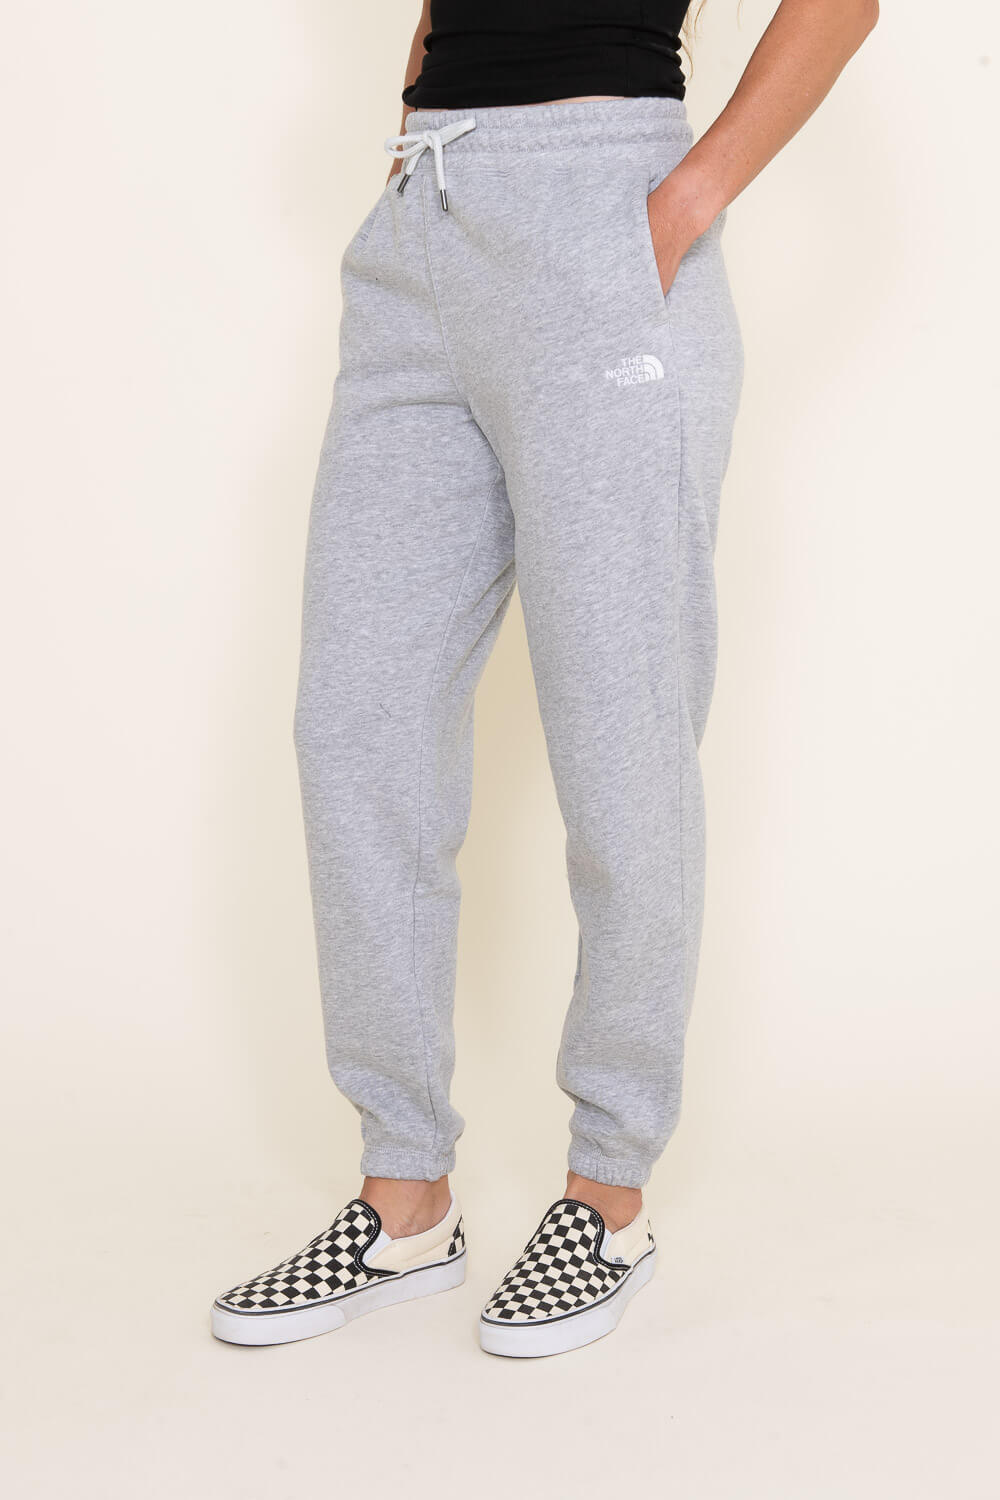 The North Face Fleece Sweatpants for Women in Grey